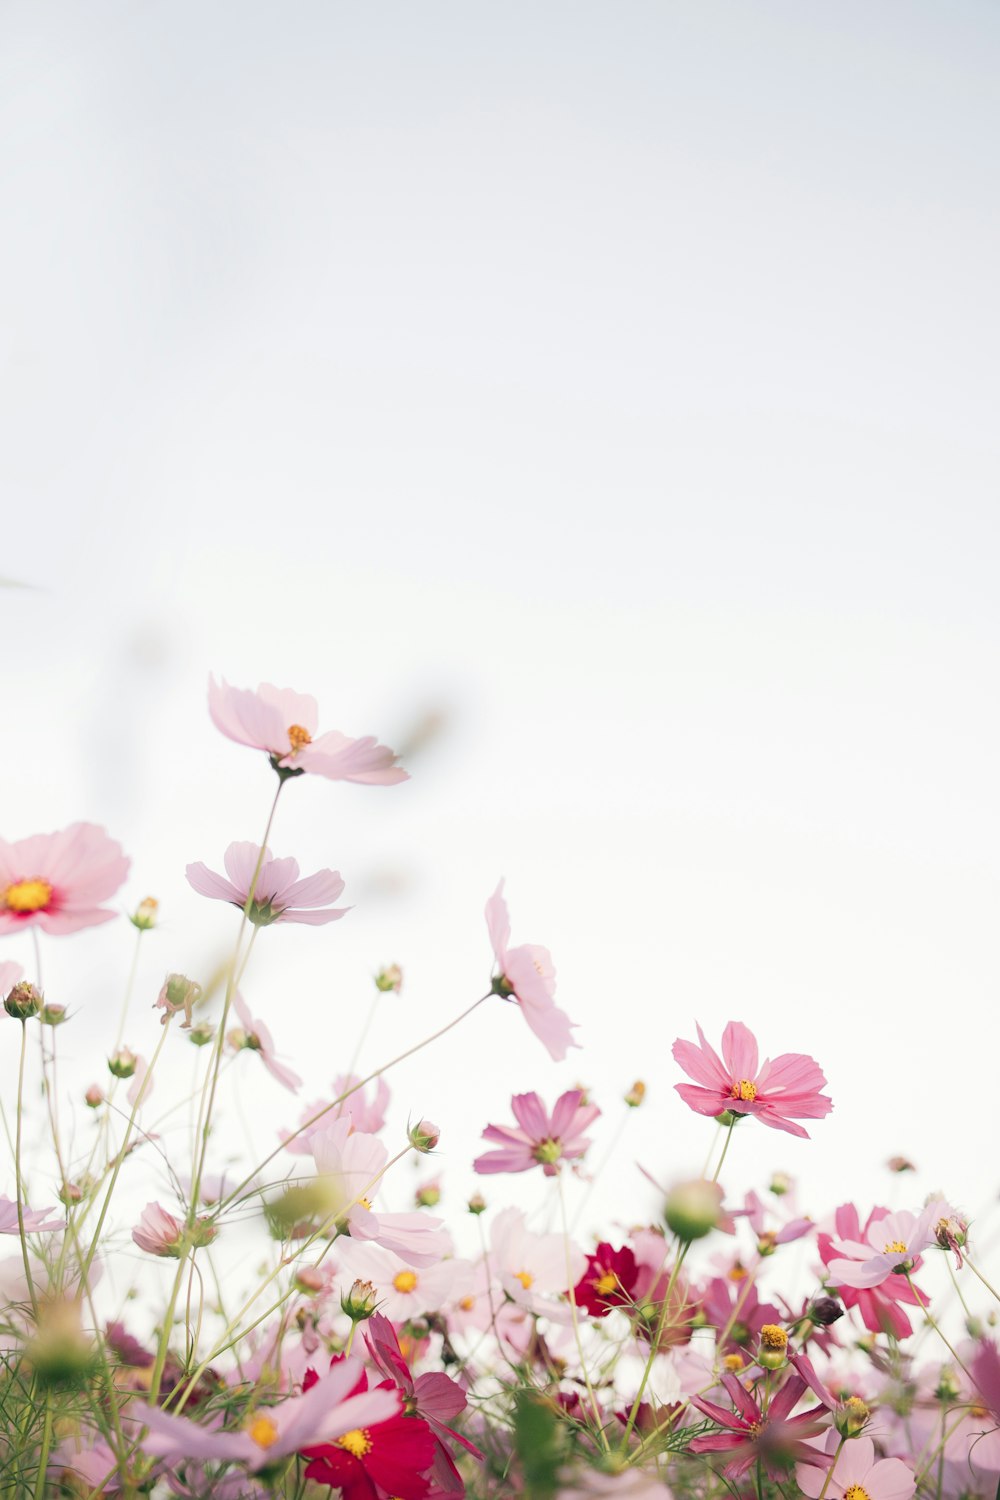 pink flowers with white background